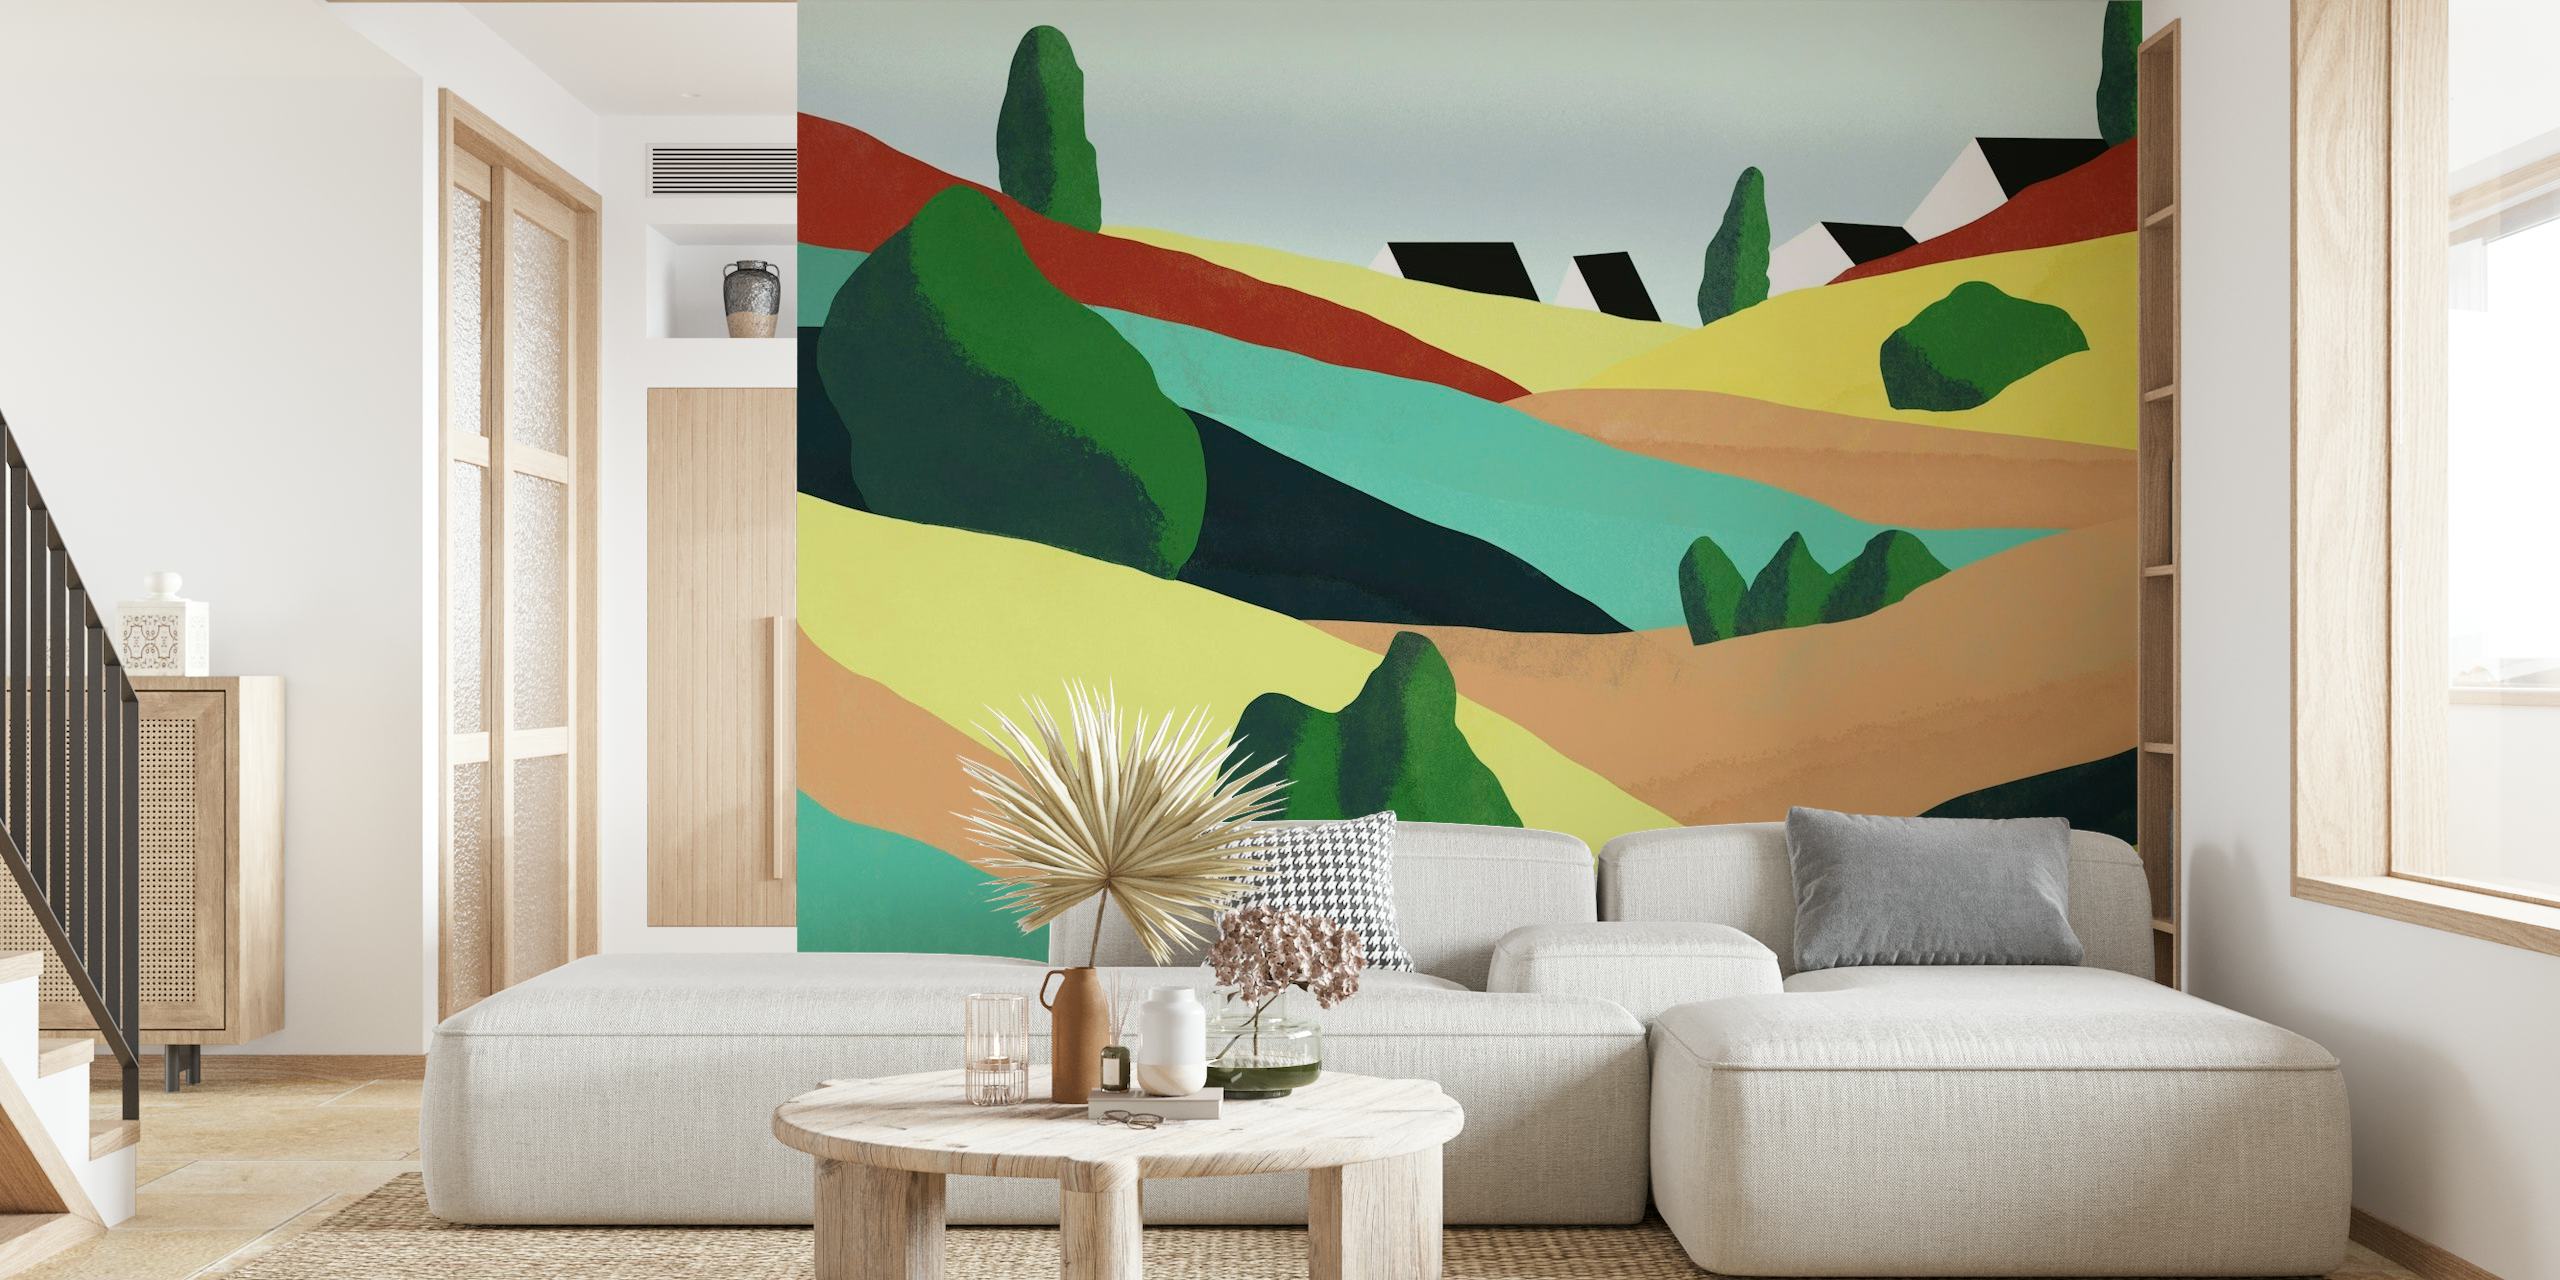 Abstract rolling hills wall mural with colorful cartoon-like landscape